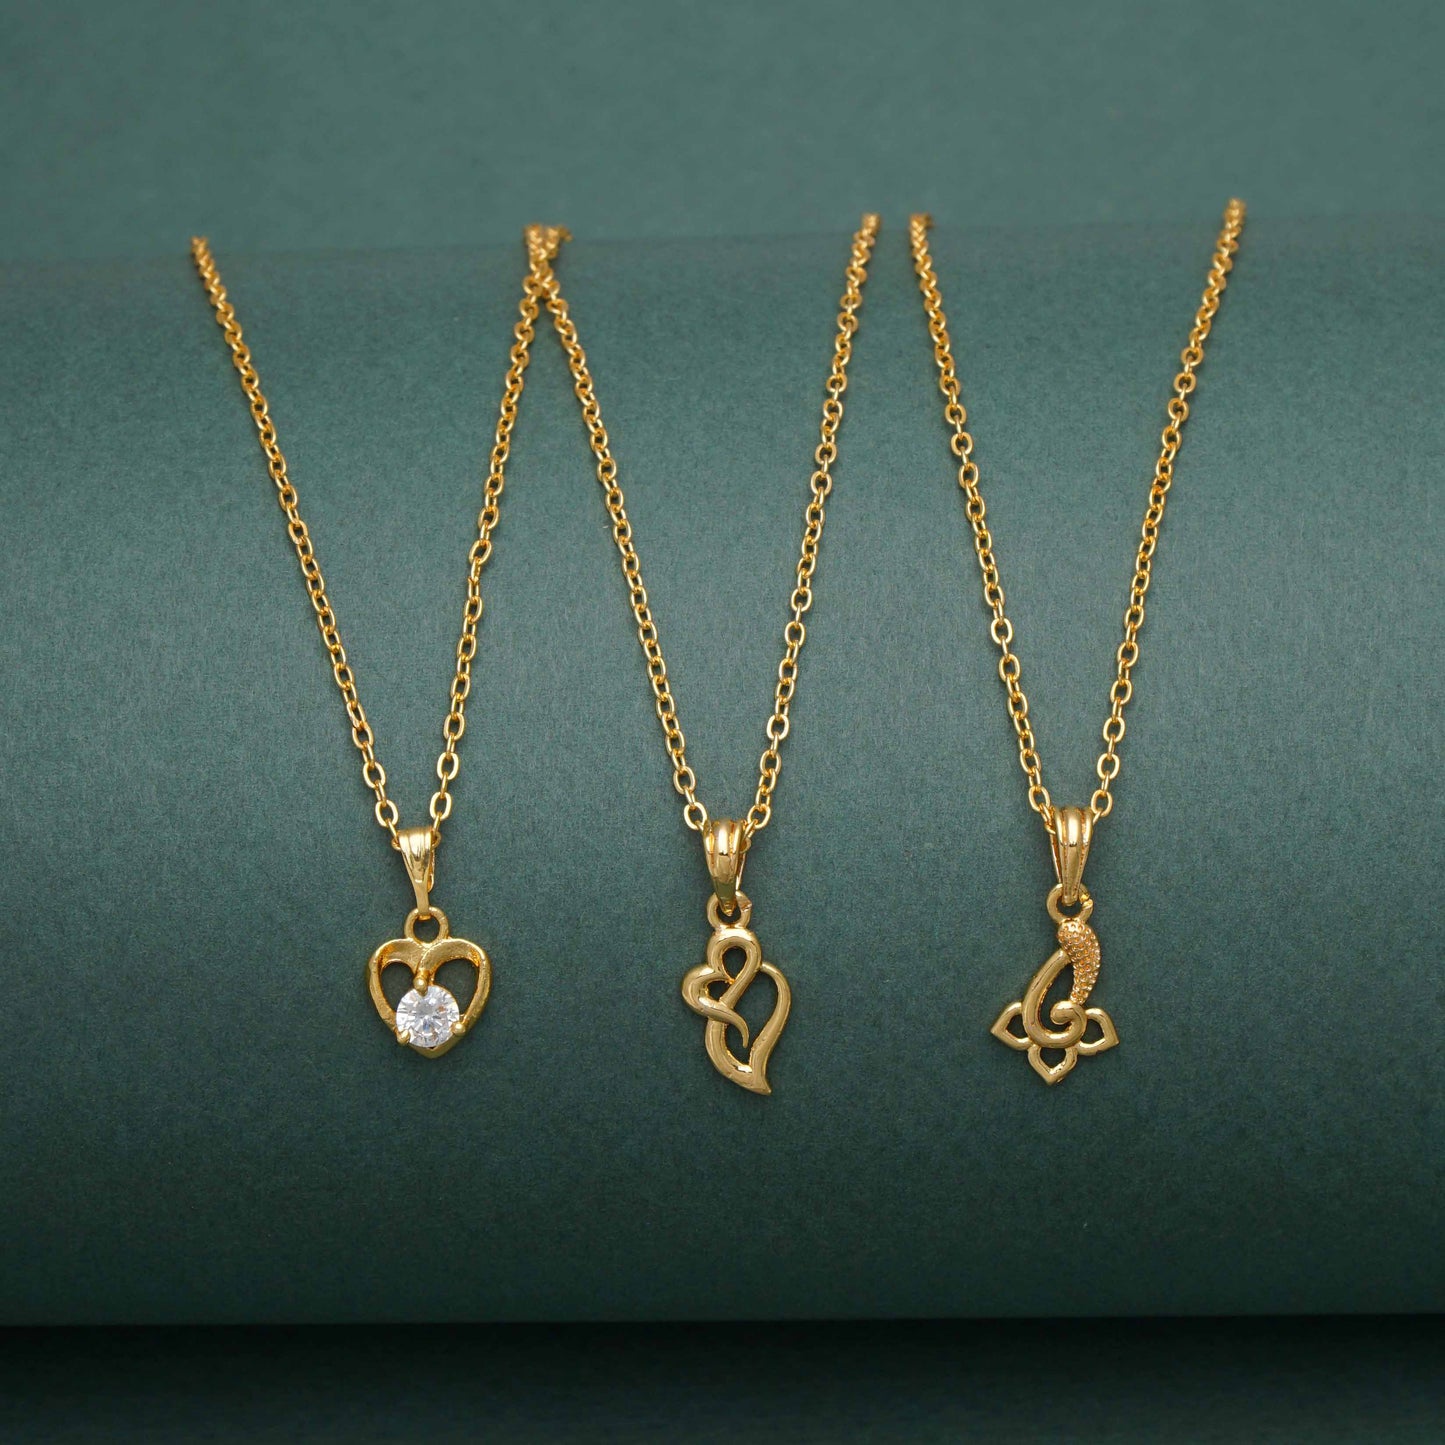 Charming and Stunning Gold Plated Necklace Chain Pendant For Women and Girls